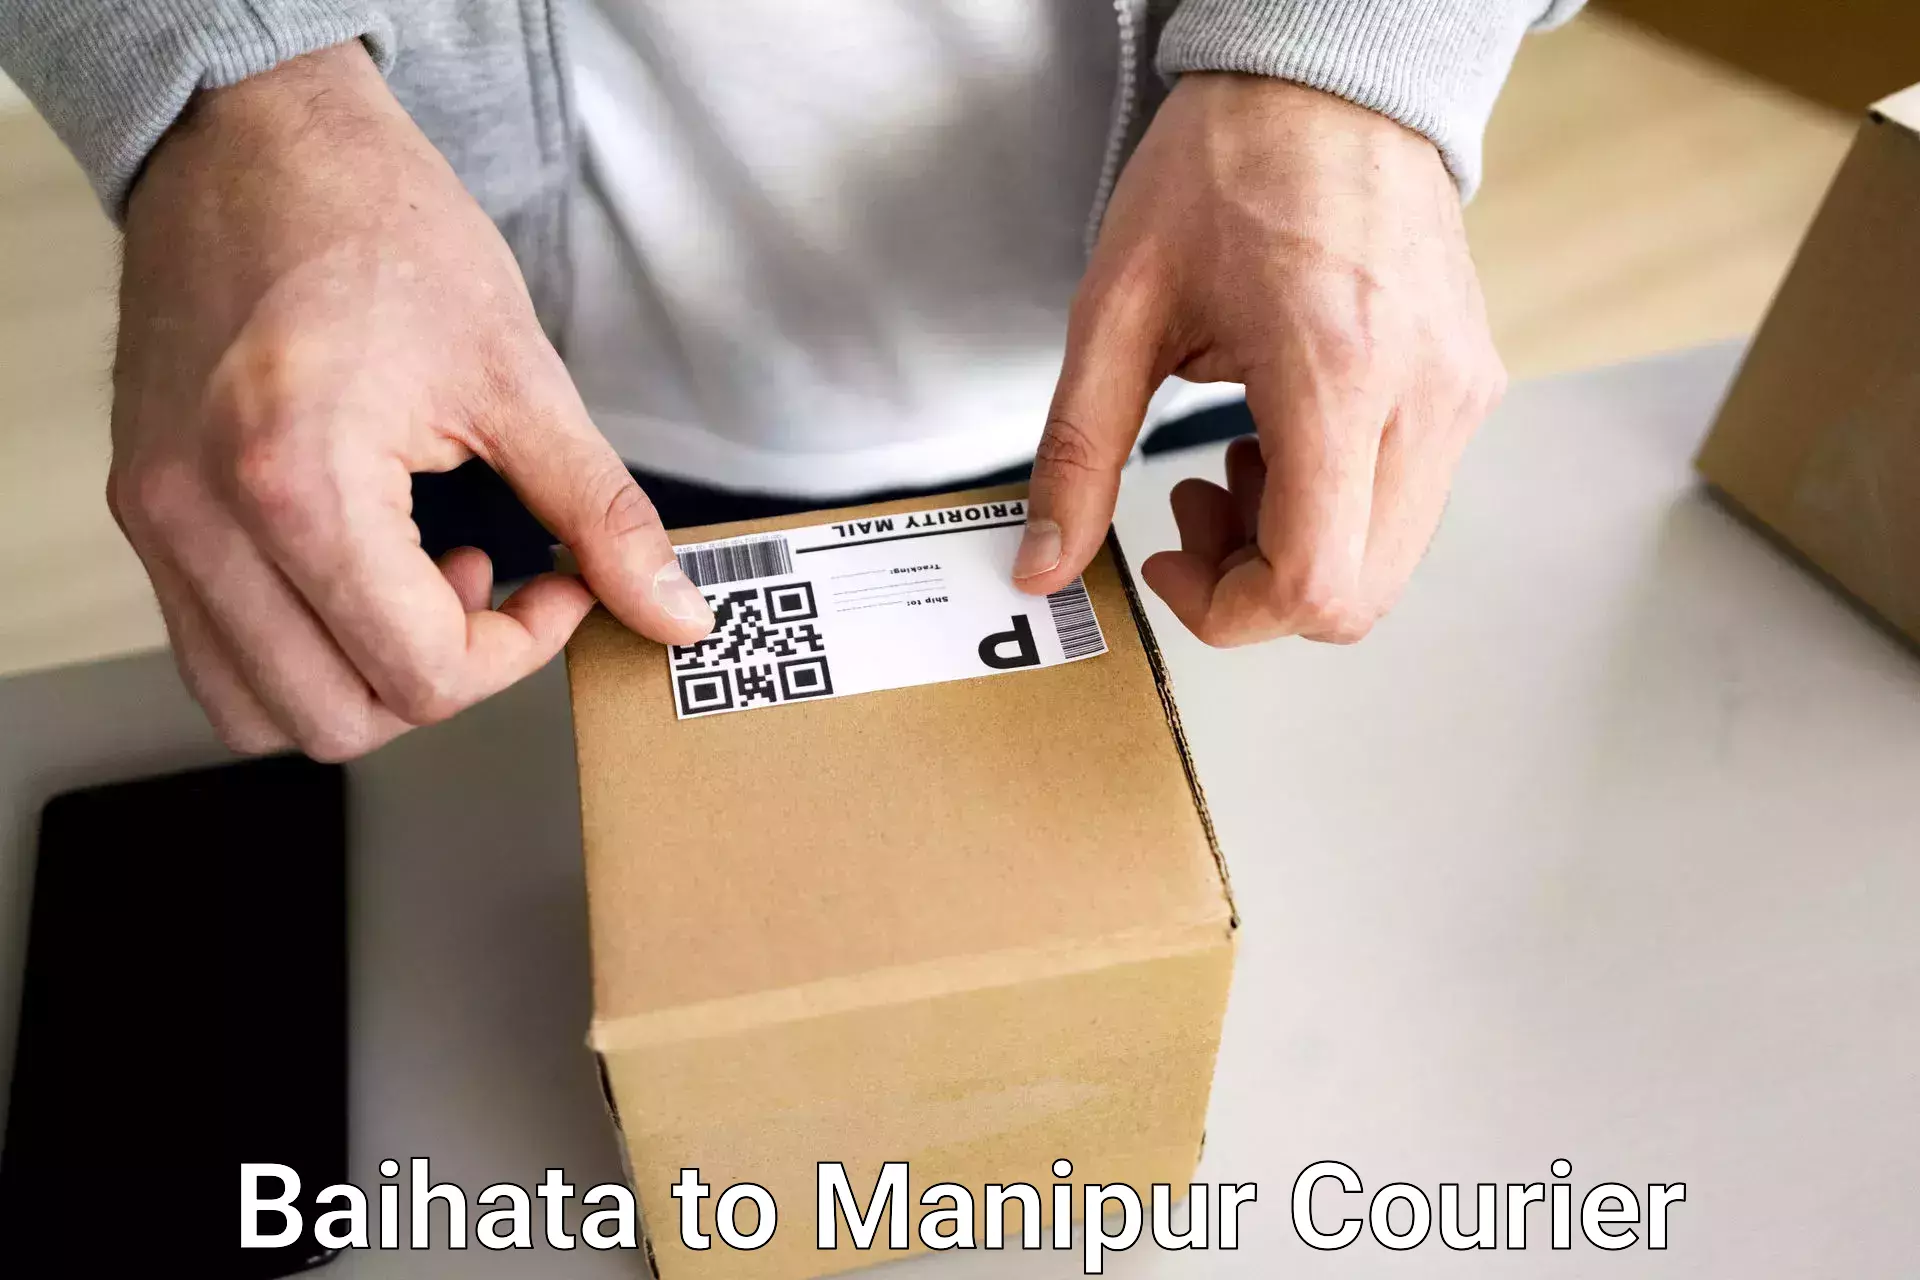 Luggage shipment specialists Baihata to Manipur